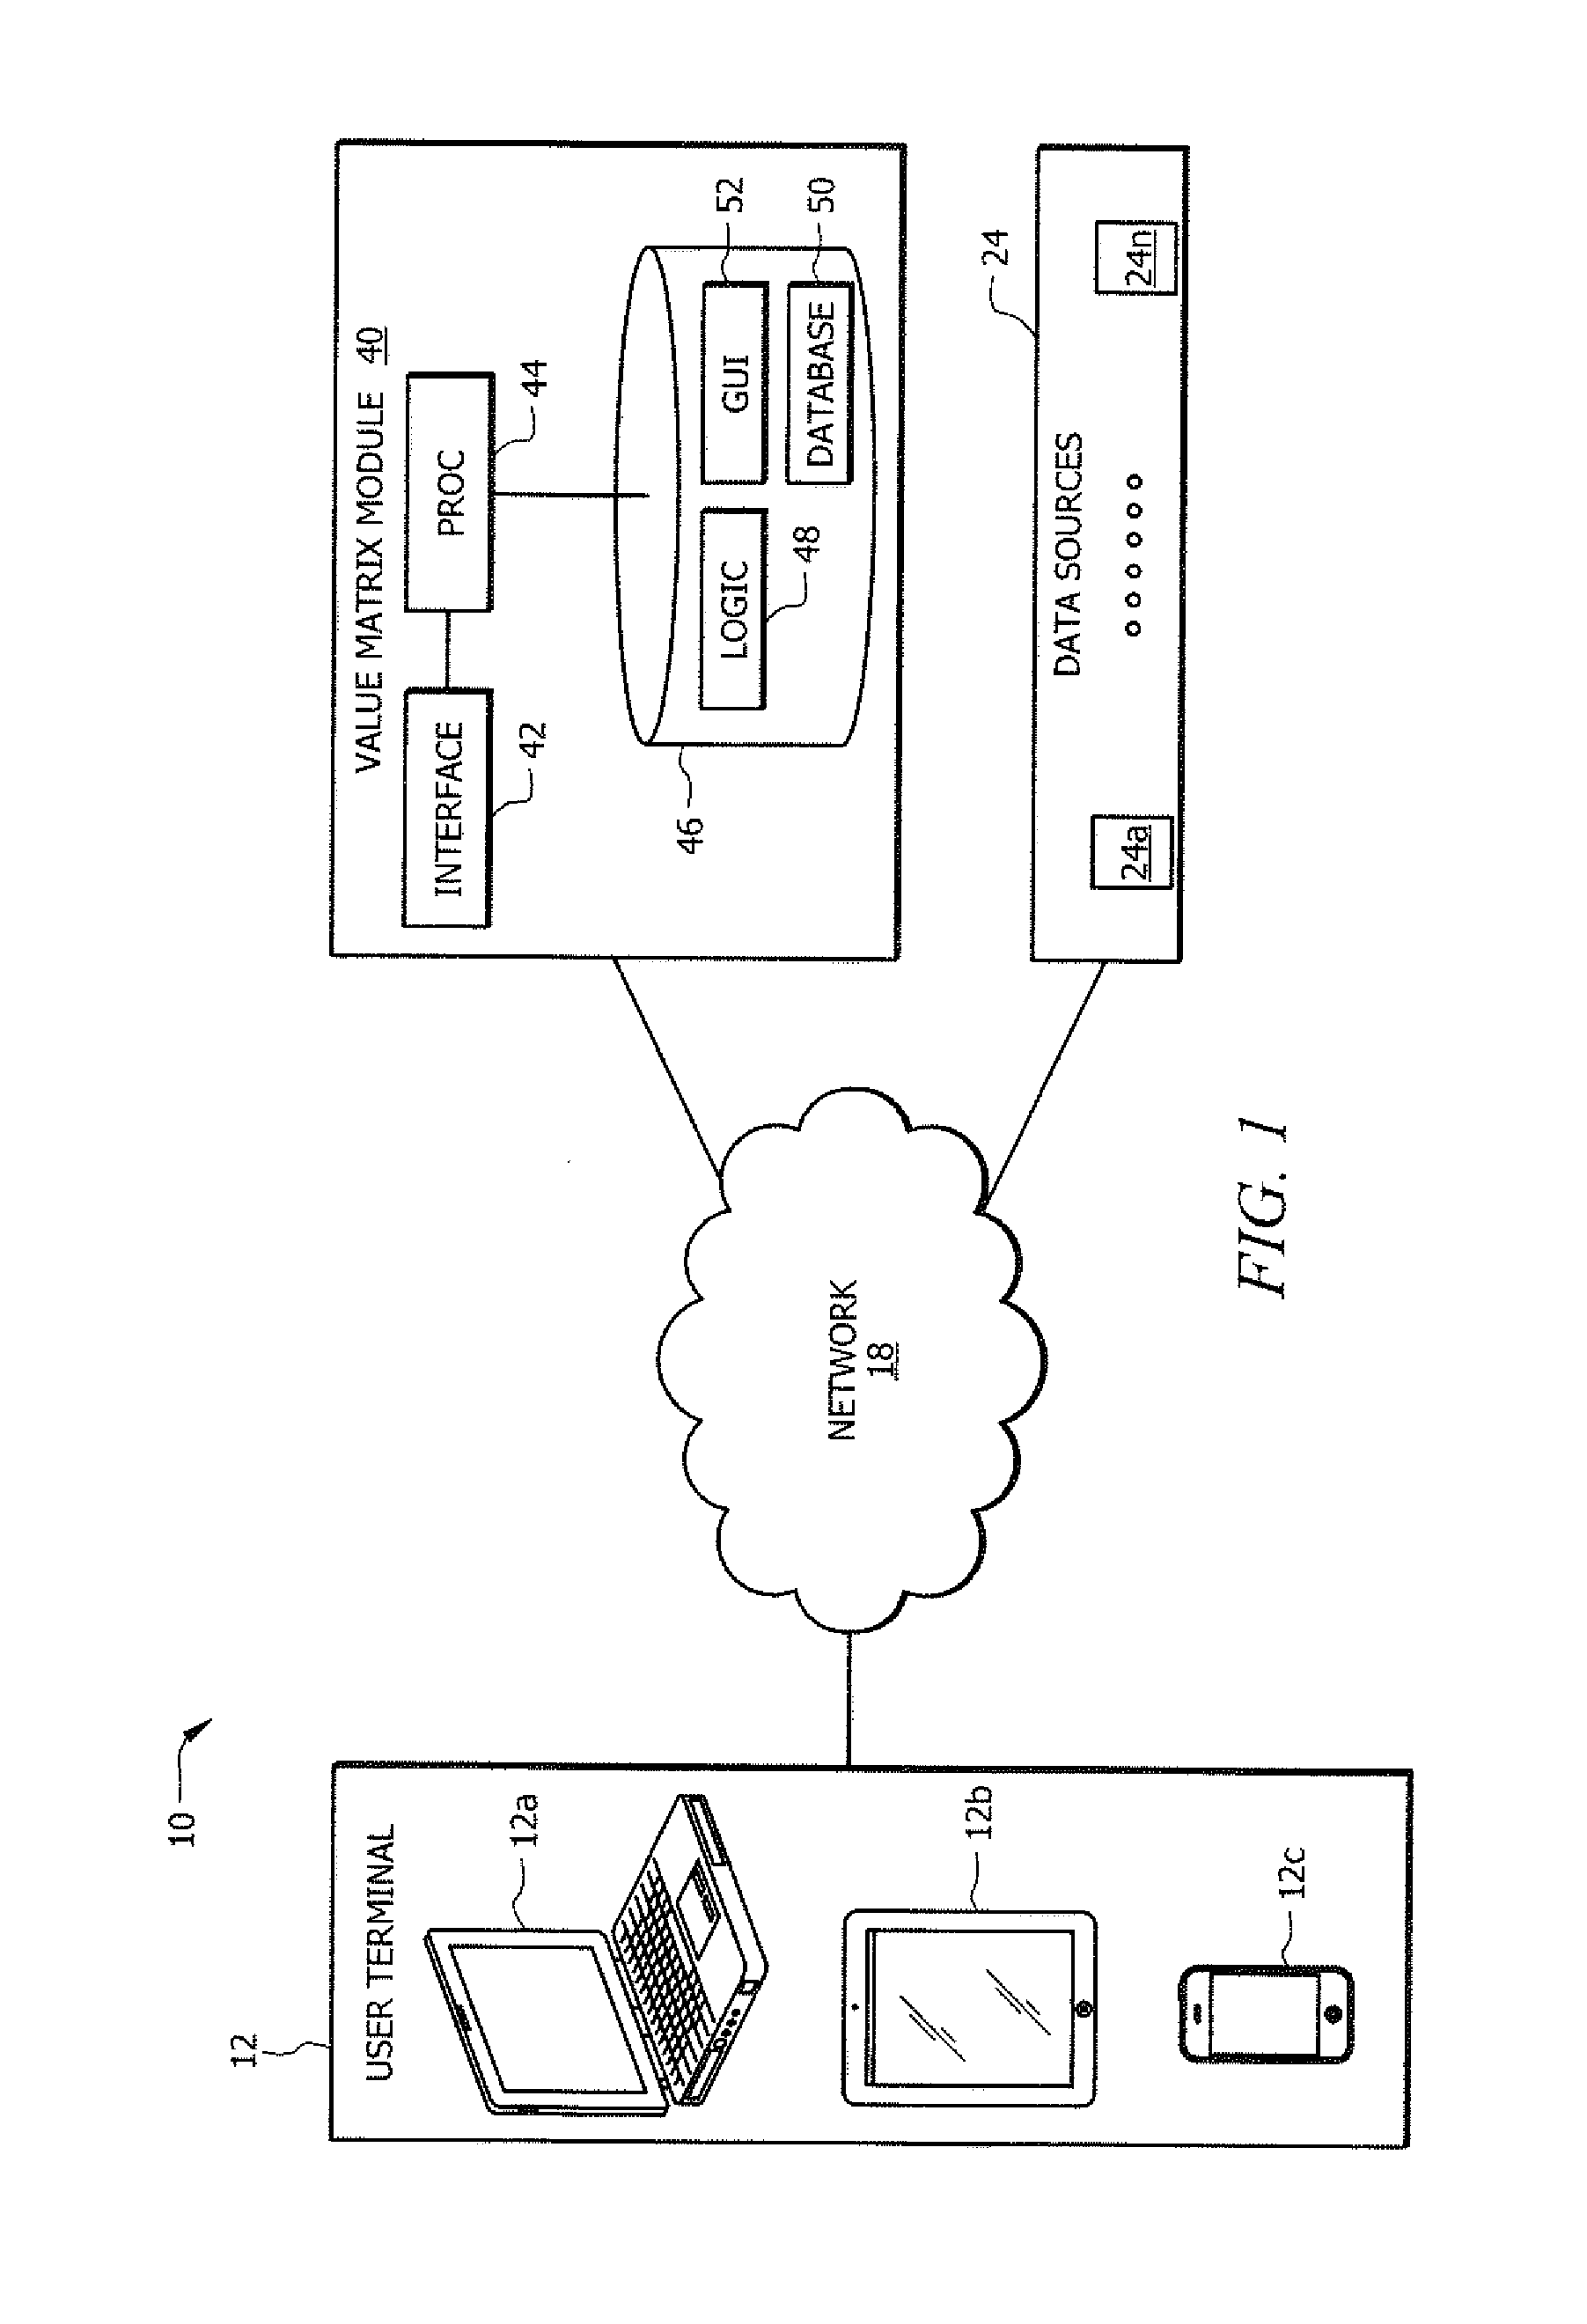 System and Method for Mapping Financial Data